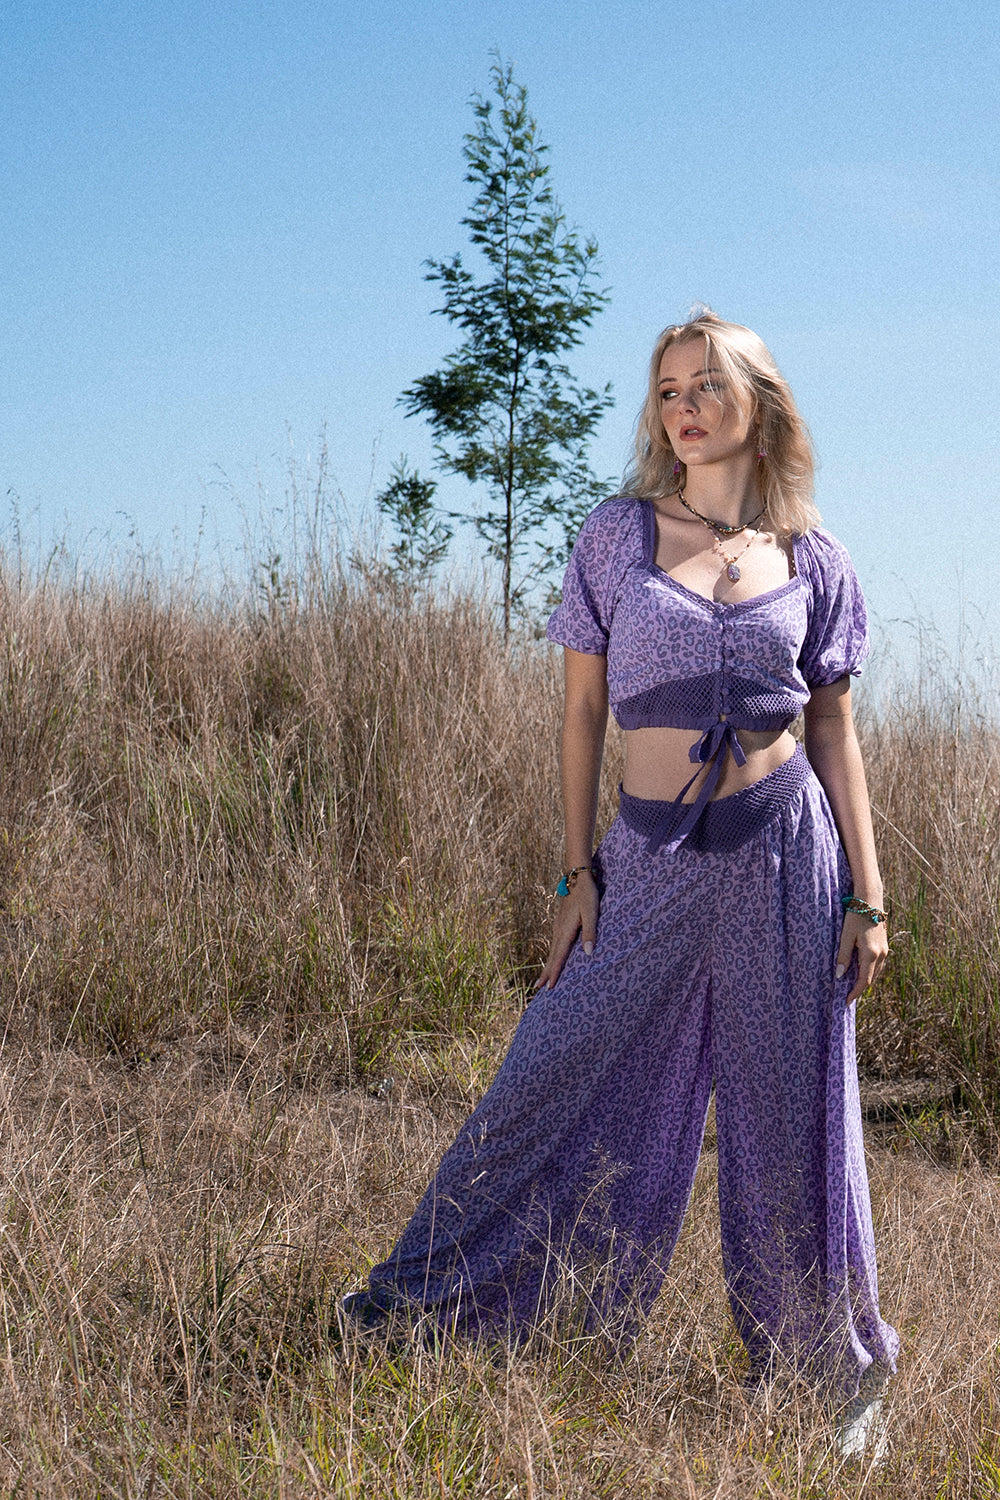 Clover Crop Top - Lilac - Into the Wild by Tulle and Batiste